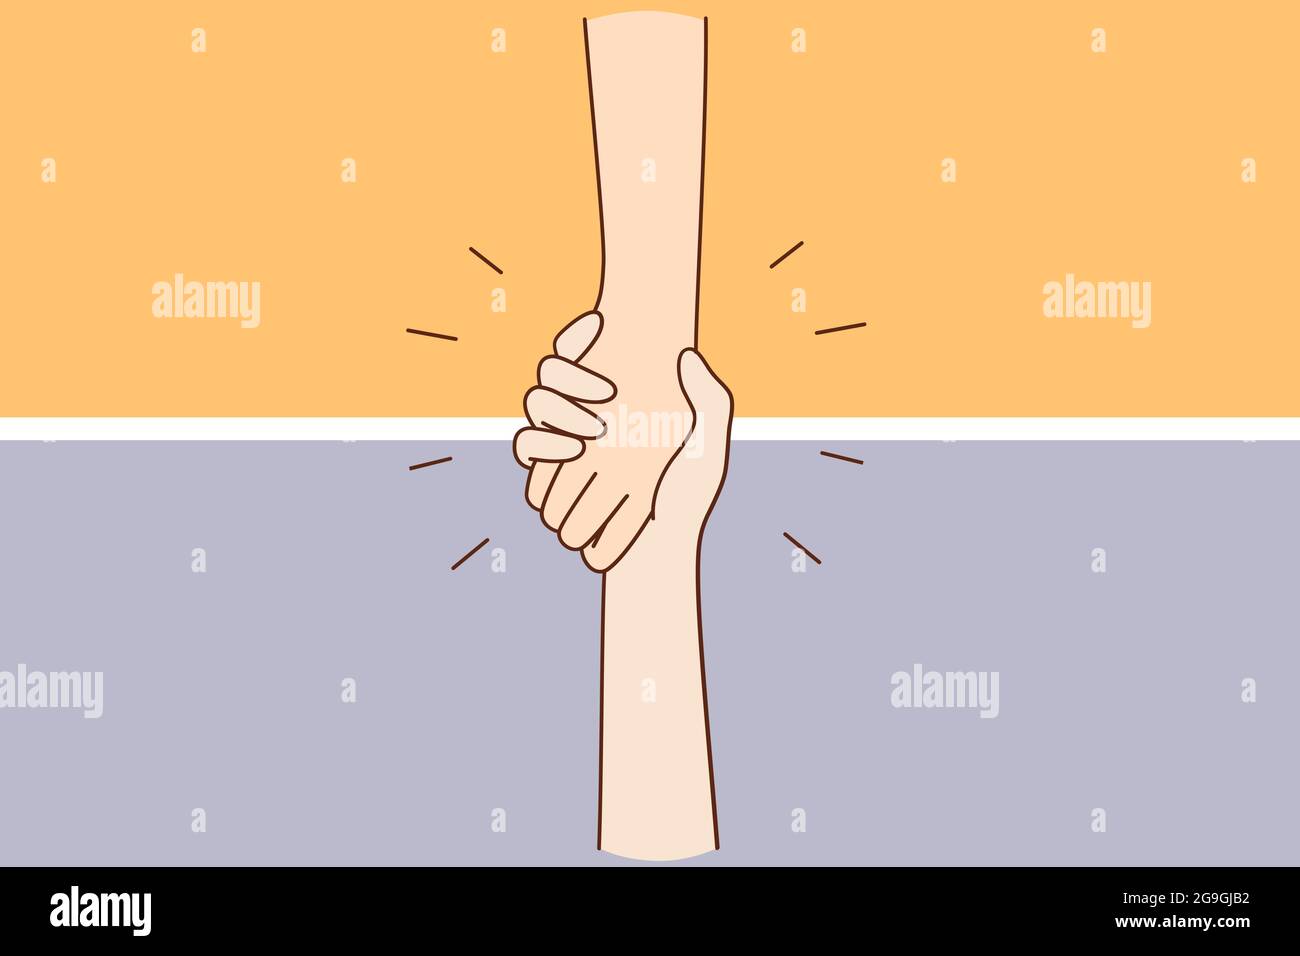 Helping hand, support, assistance concept. Hand of unrecognizable person holding another hand falling down helping supporting vector illustration  Stock Vector